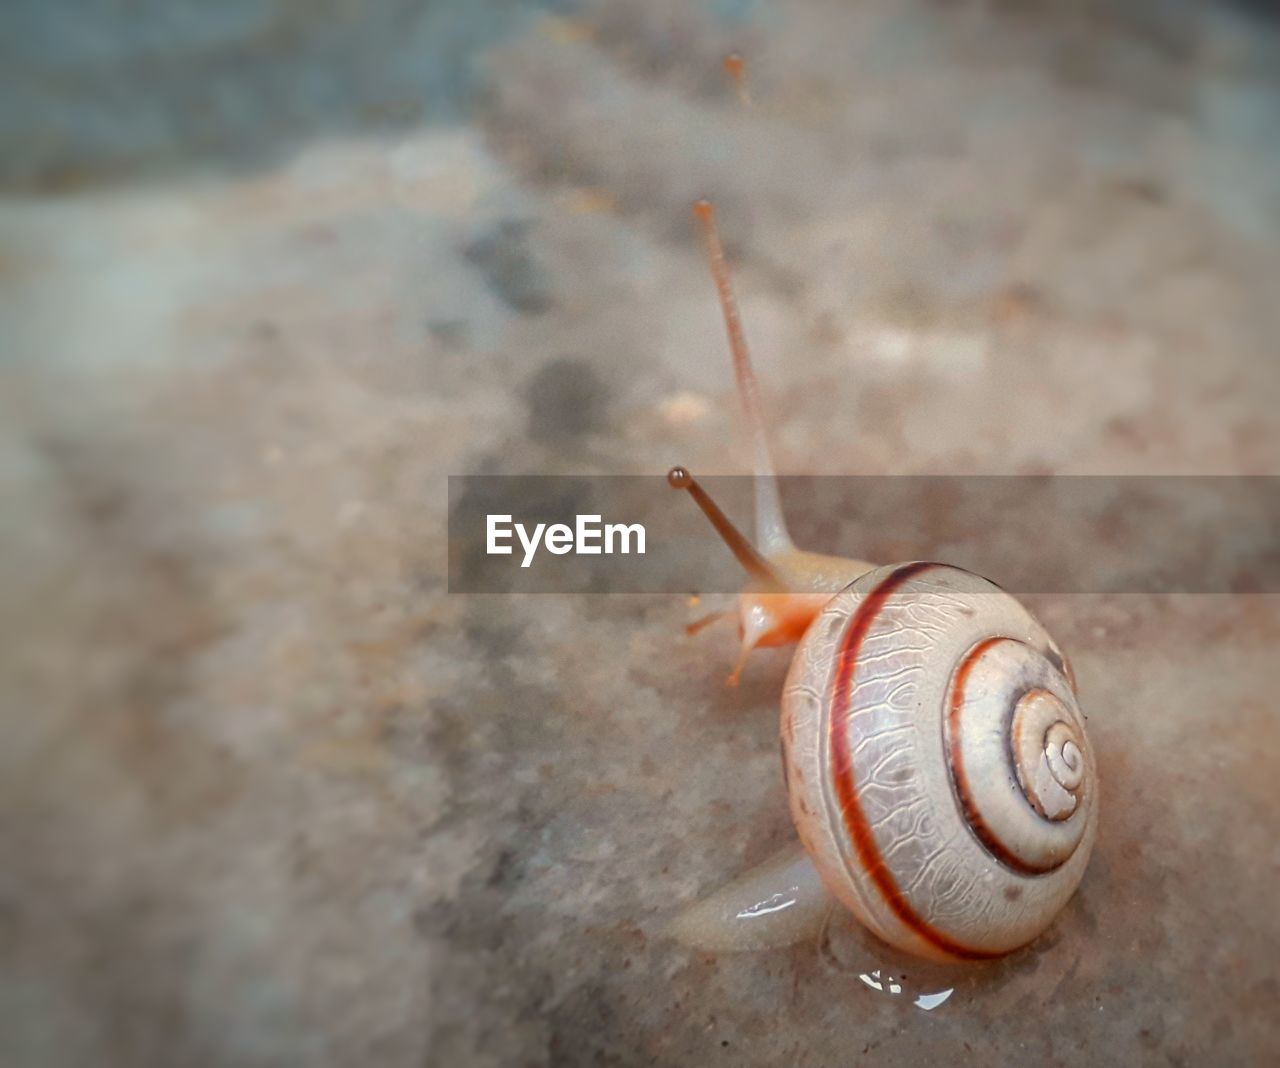 CLOSE-UP OF SNAIL ON A SURFACE